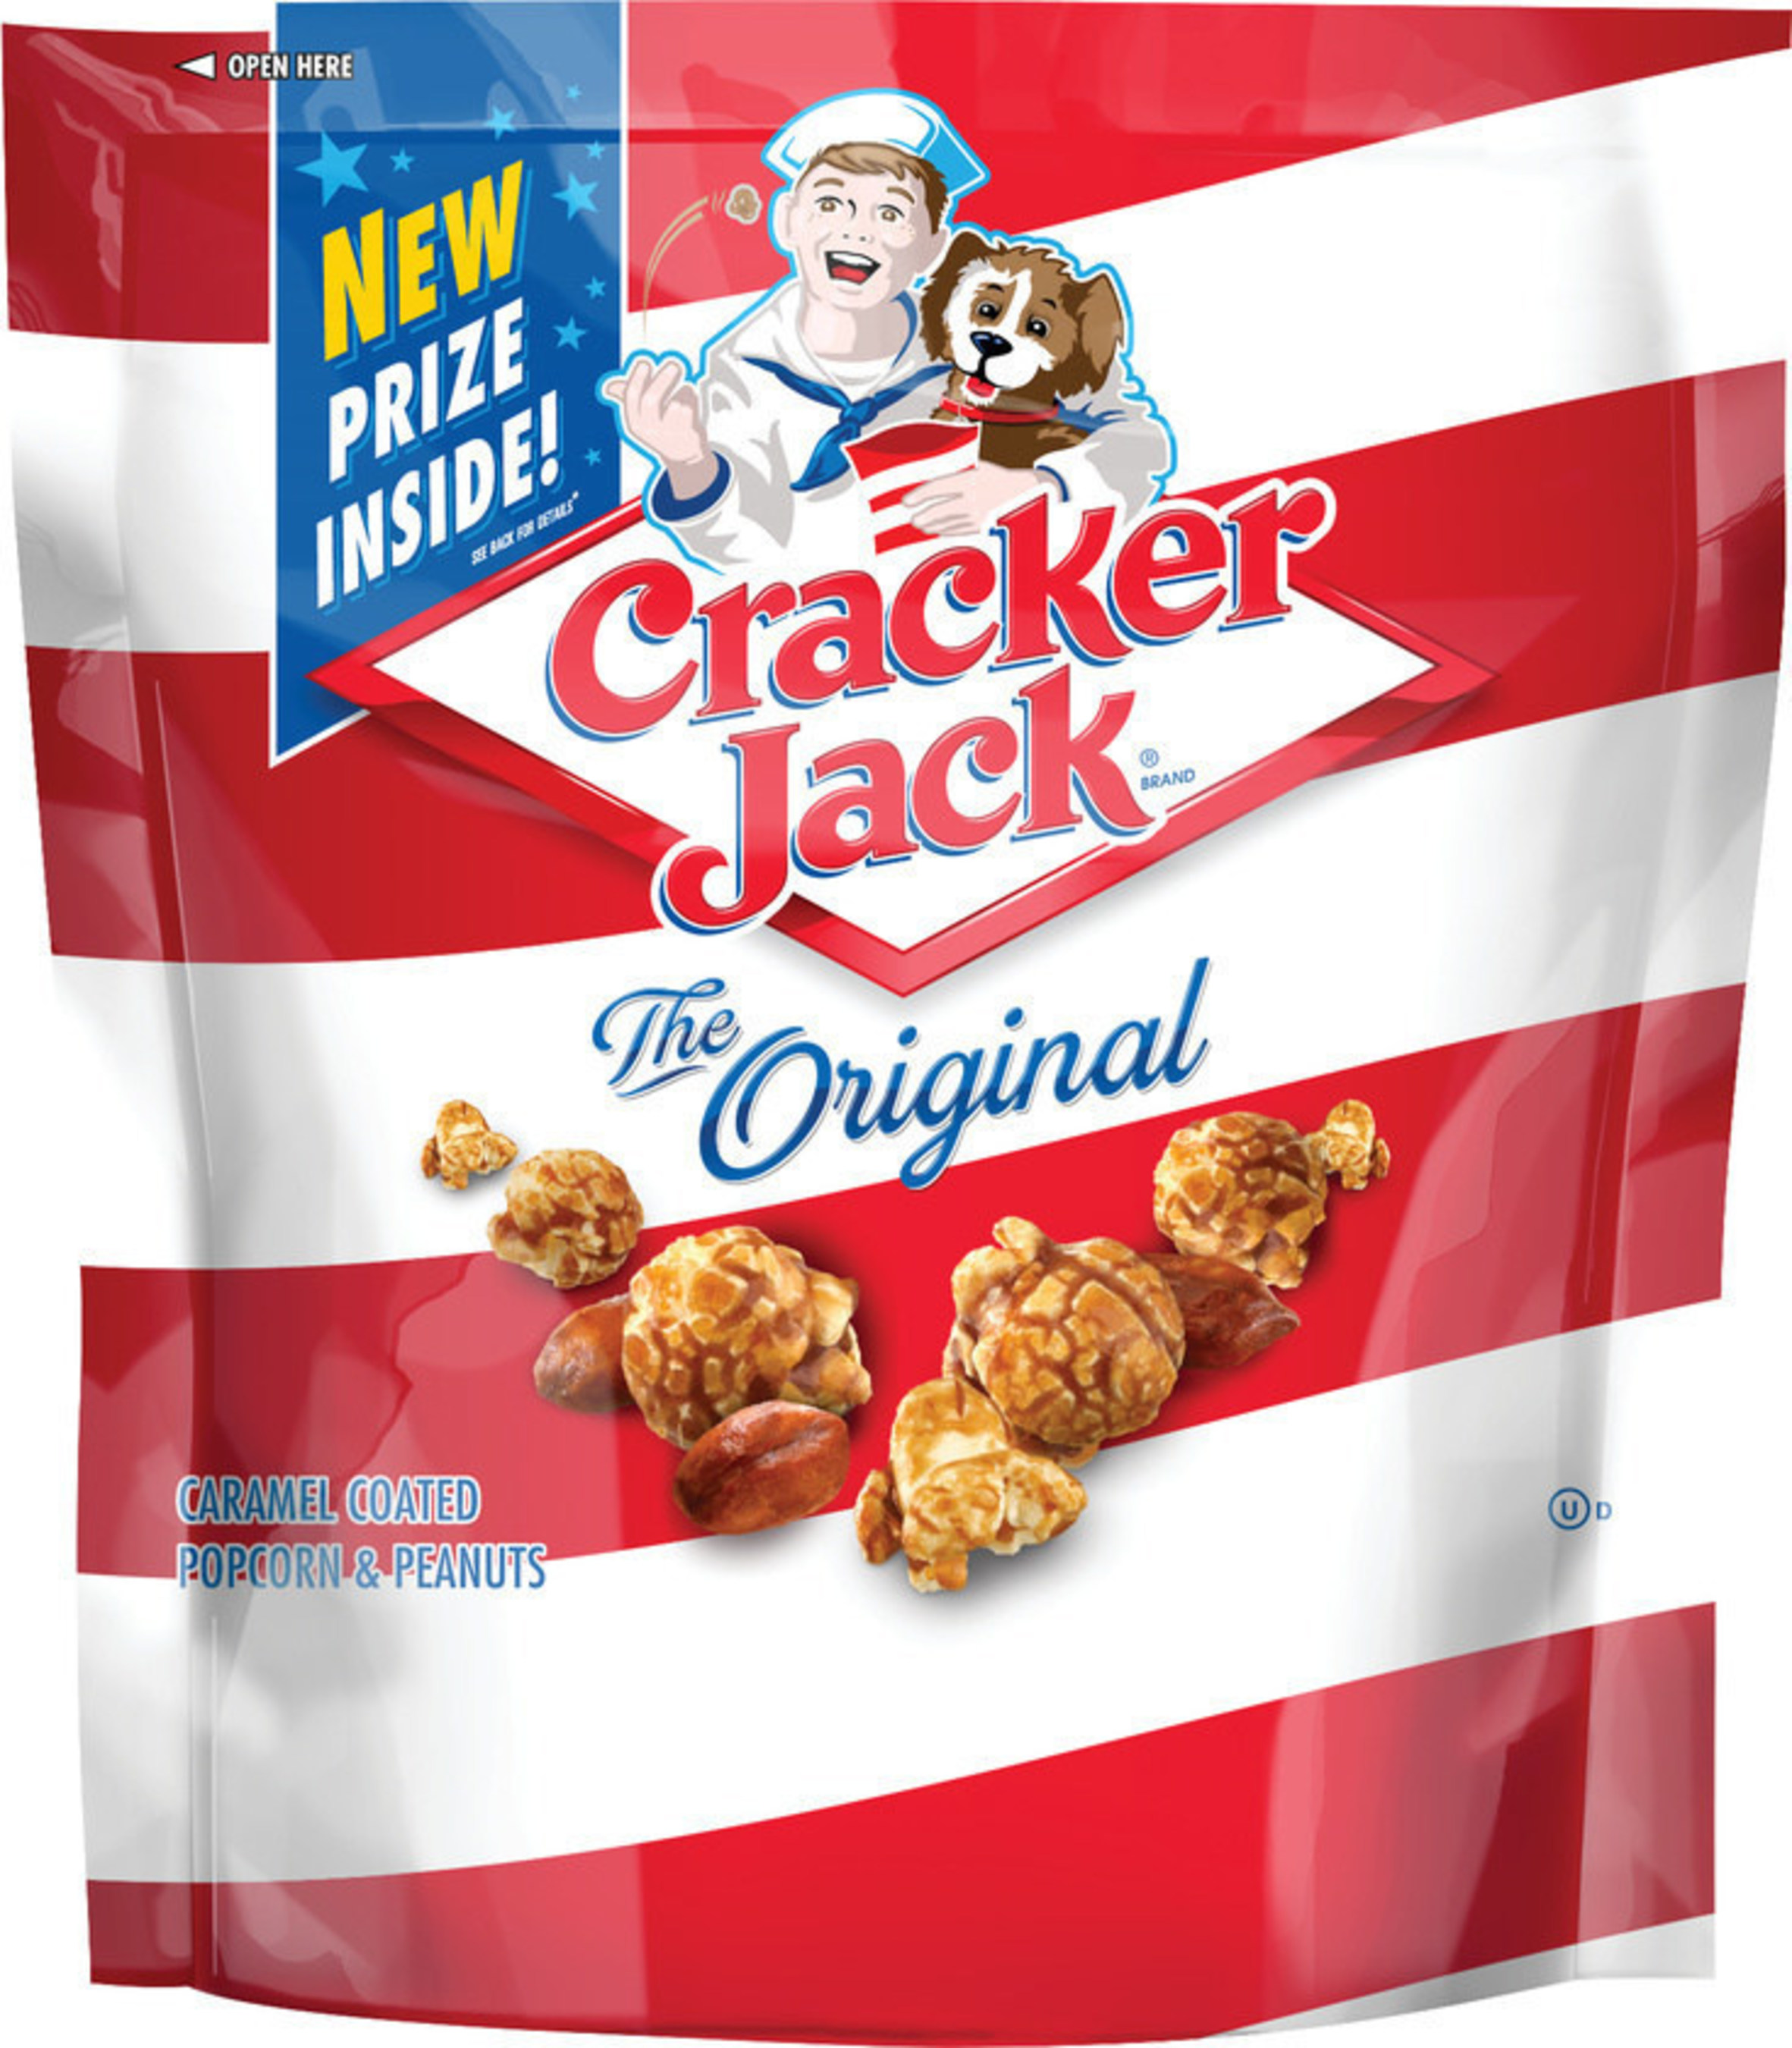 Cracker Jack is unveiling a contemporized logo and packaging, with a whole new approach to the Prize Inside with baseball-inspired mobile digital experiences directly from the sticker inside.